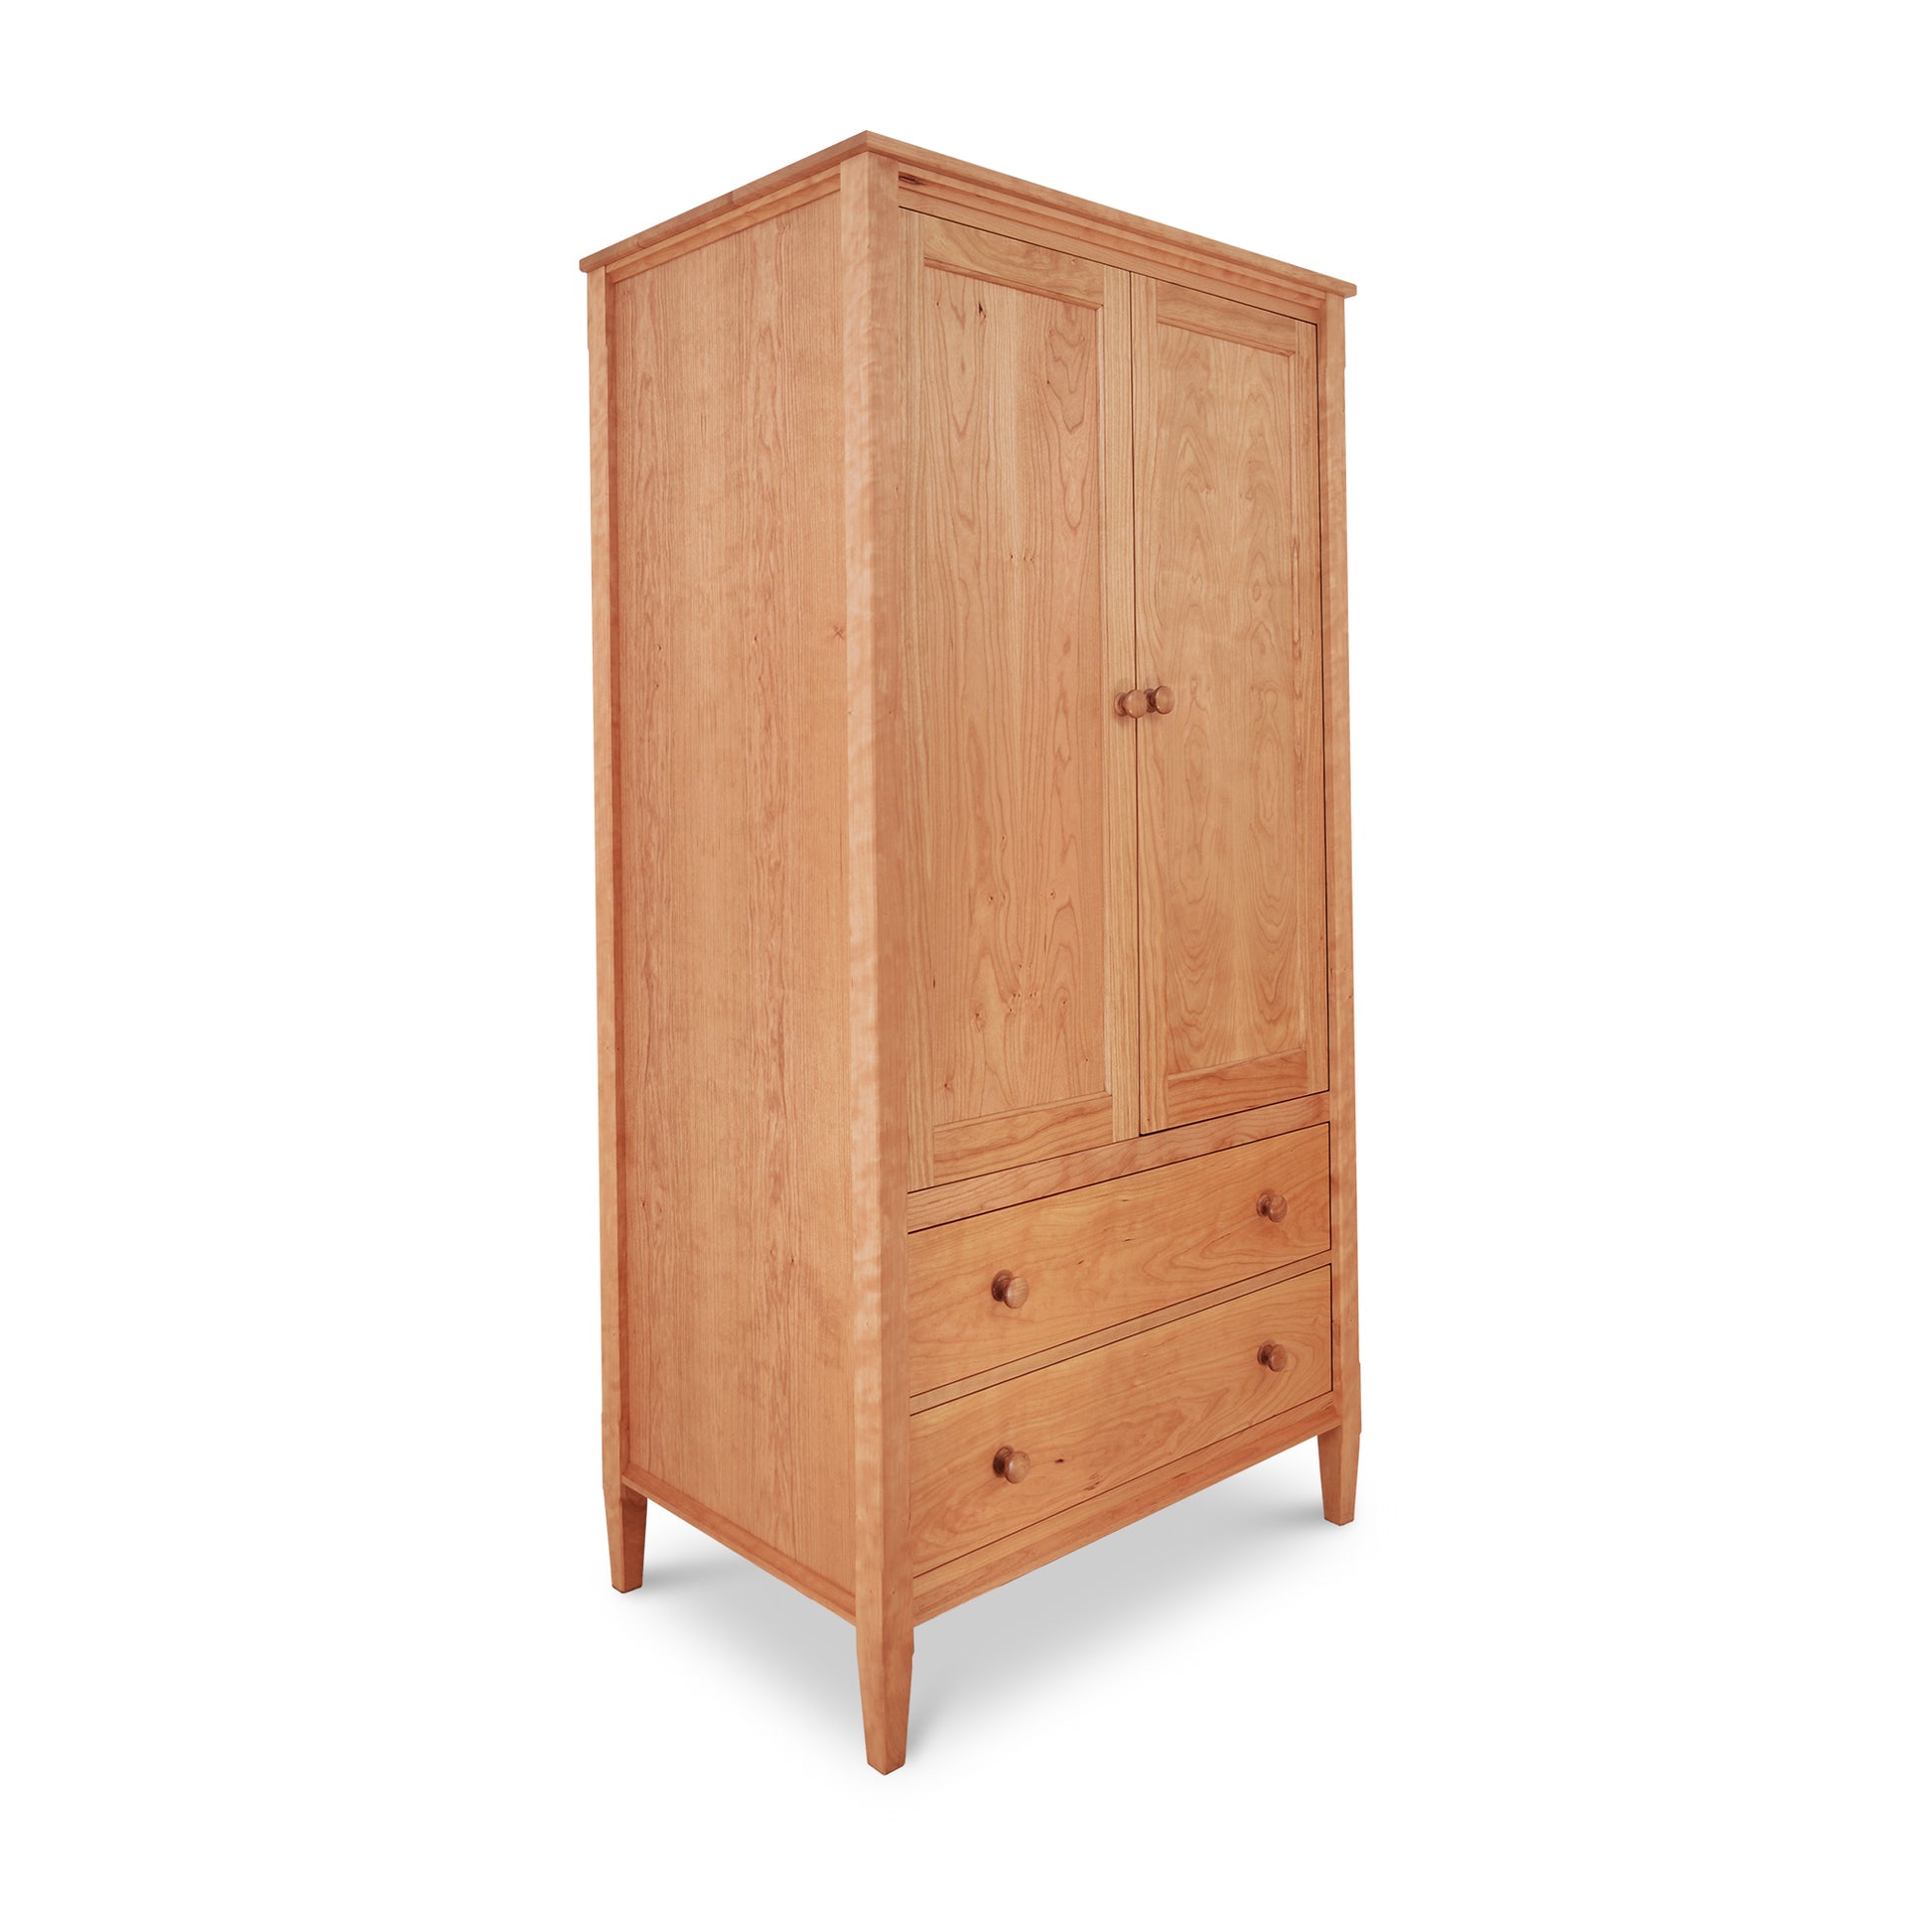 The Maple Corner Woodworks Vermont Shaker Armoire is a solid wood construction heirloom with two drawers, perfect for storing your essentials.